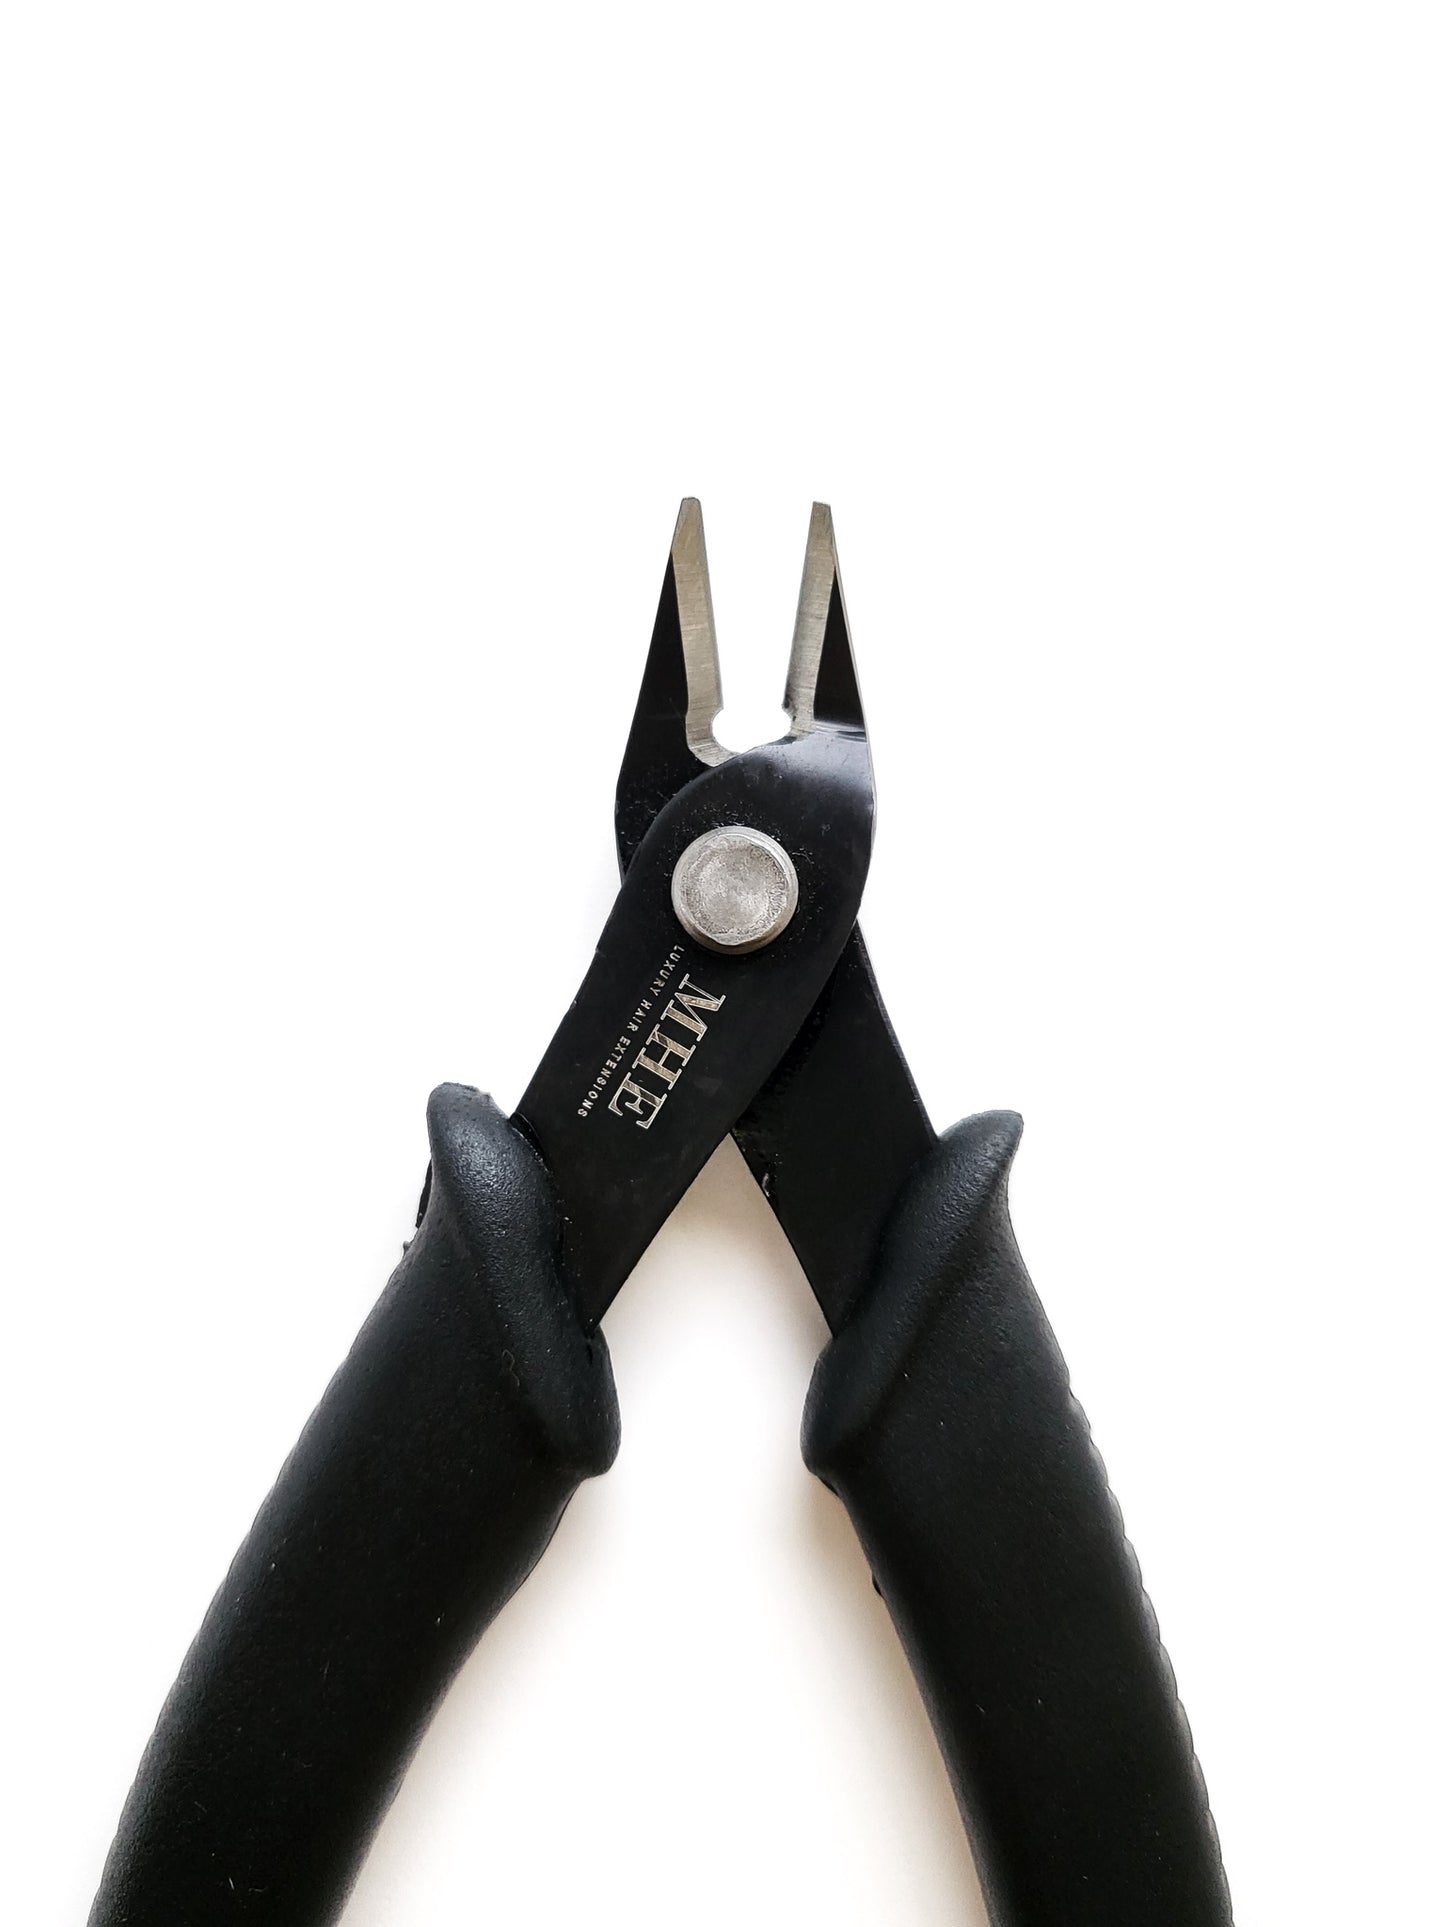 Weft cutting pliers.